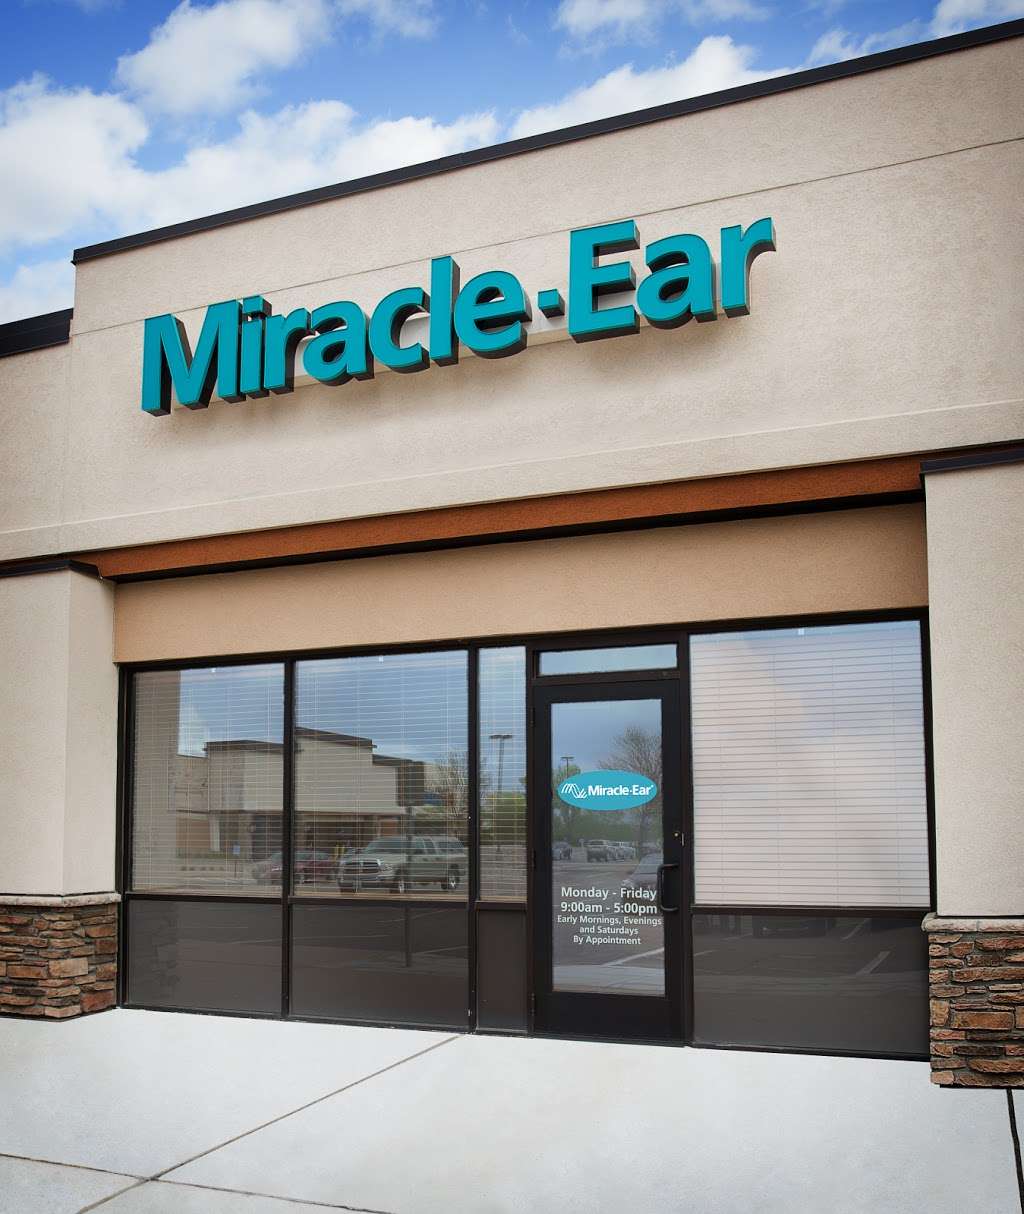 Miracle-Ear | 444 WMC Dr Ste 114, Westminster, MD 21158 | Phone: (410) 994-7544